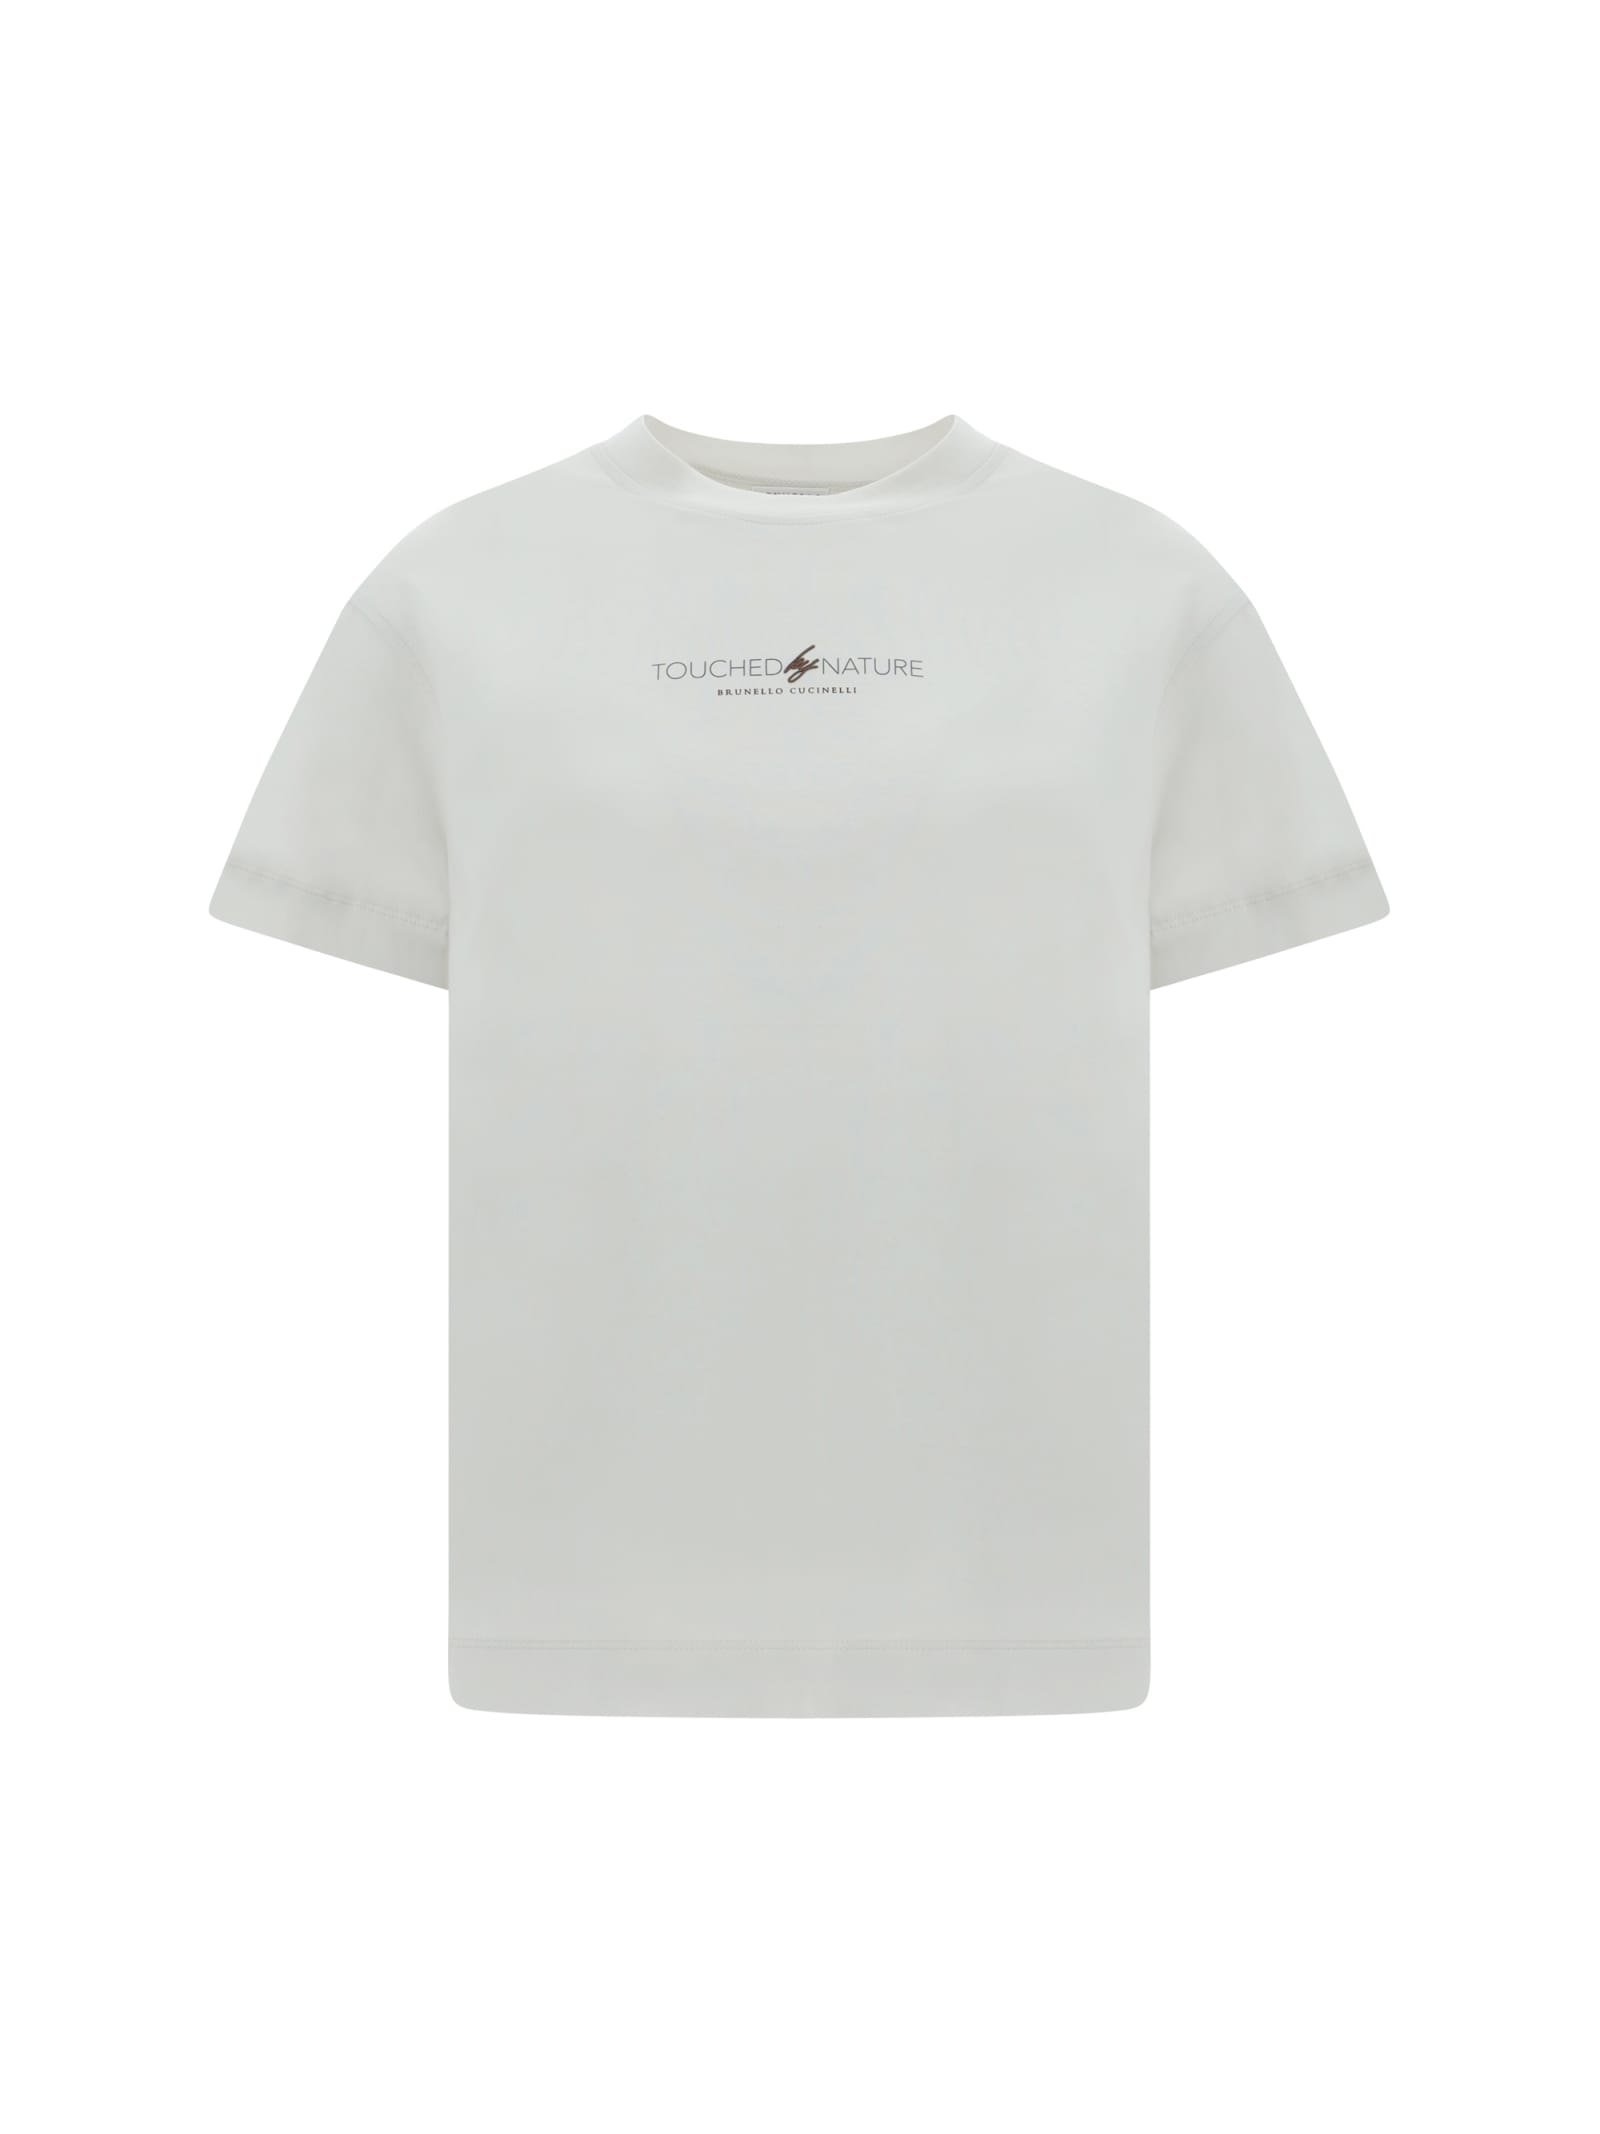 Touched Nature Logo T-shirt